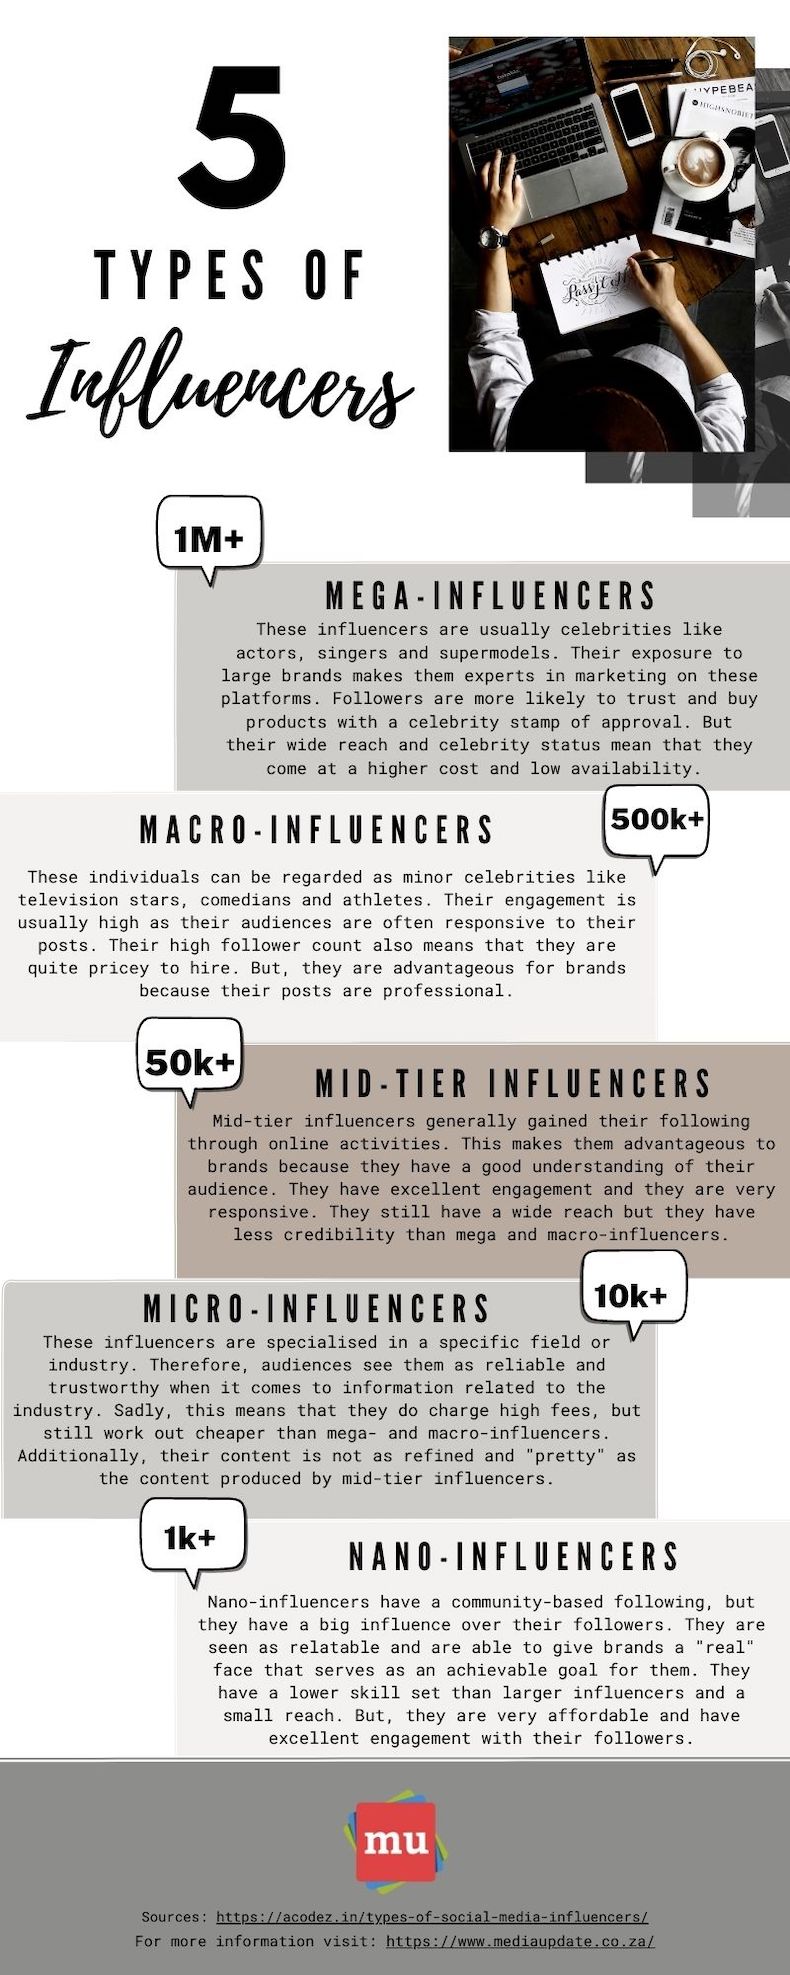 5 types of social media influencers infographic